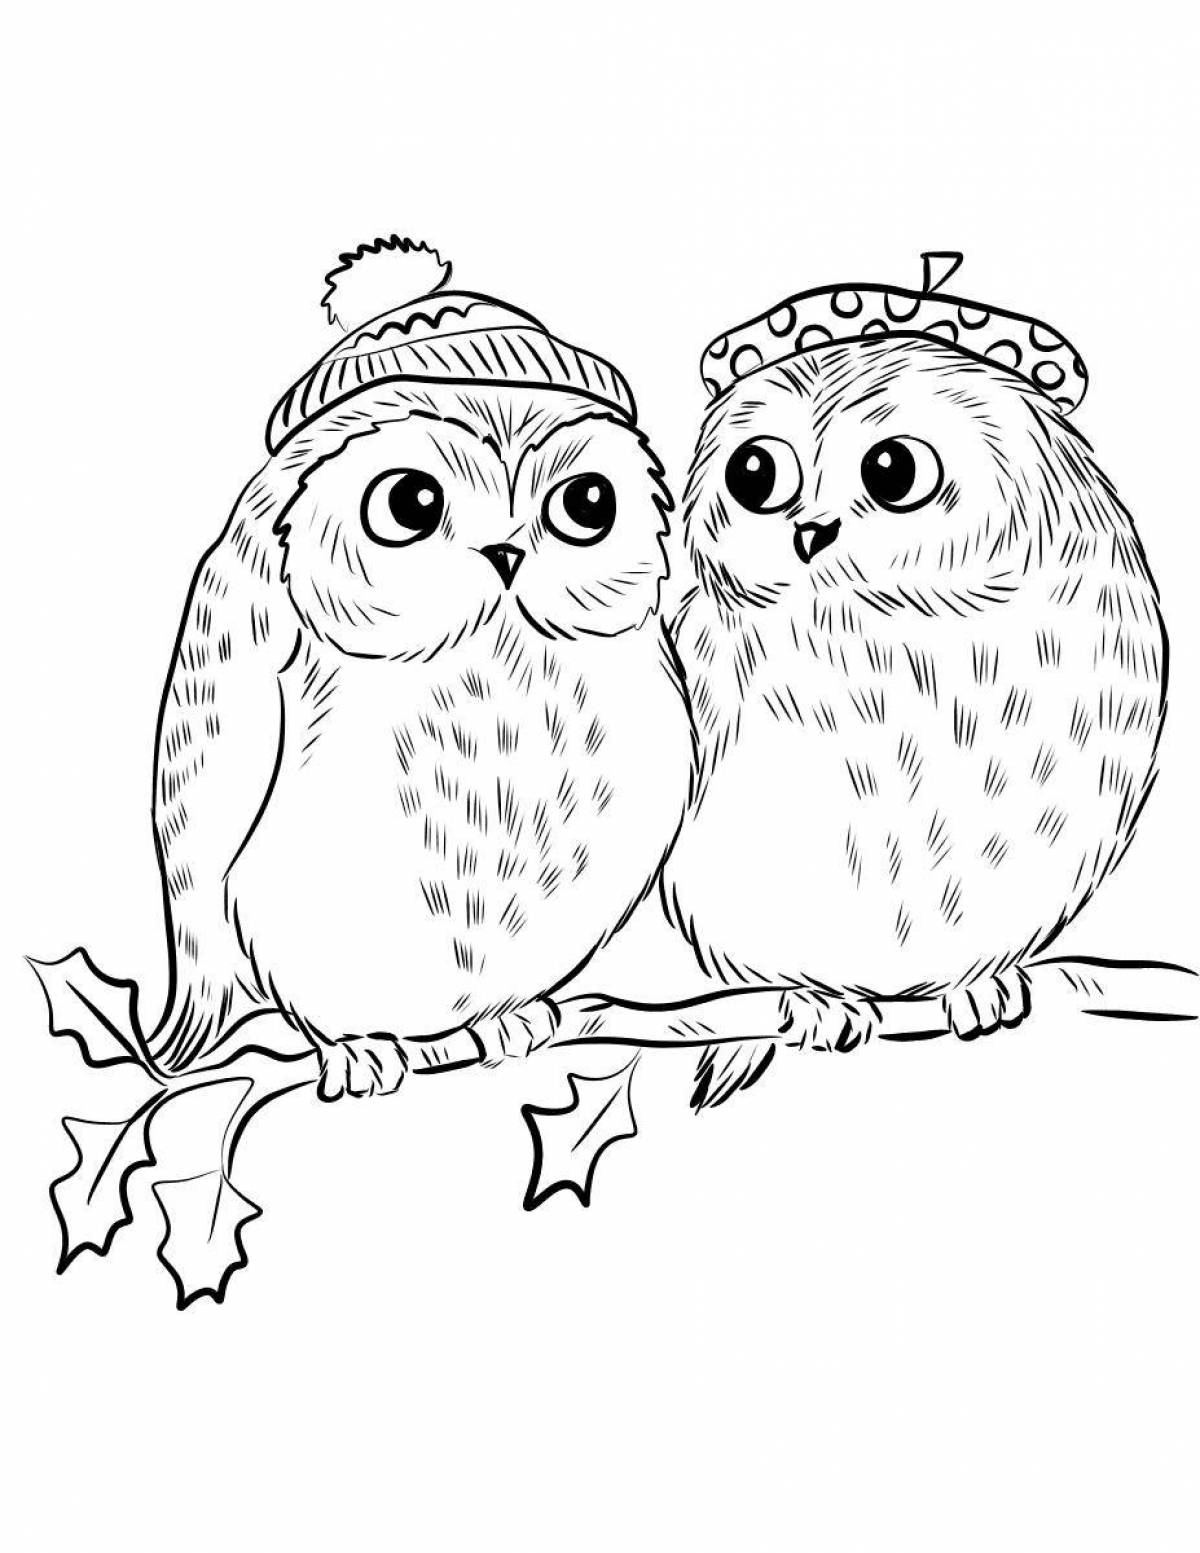 Rampant owlet coloring page